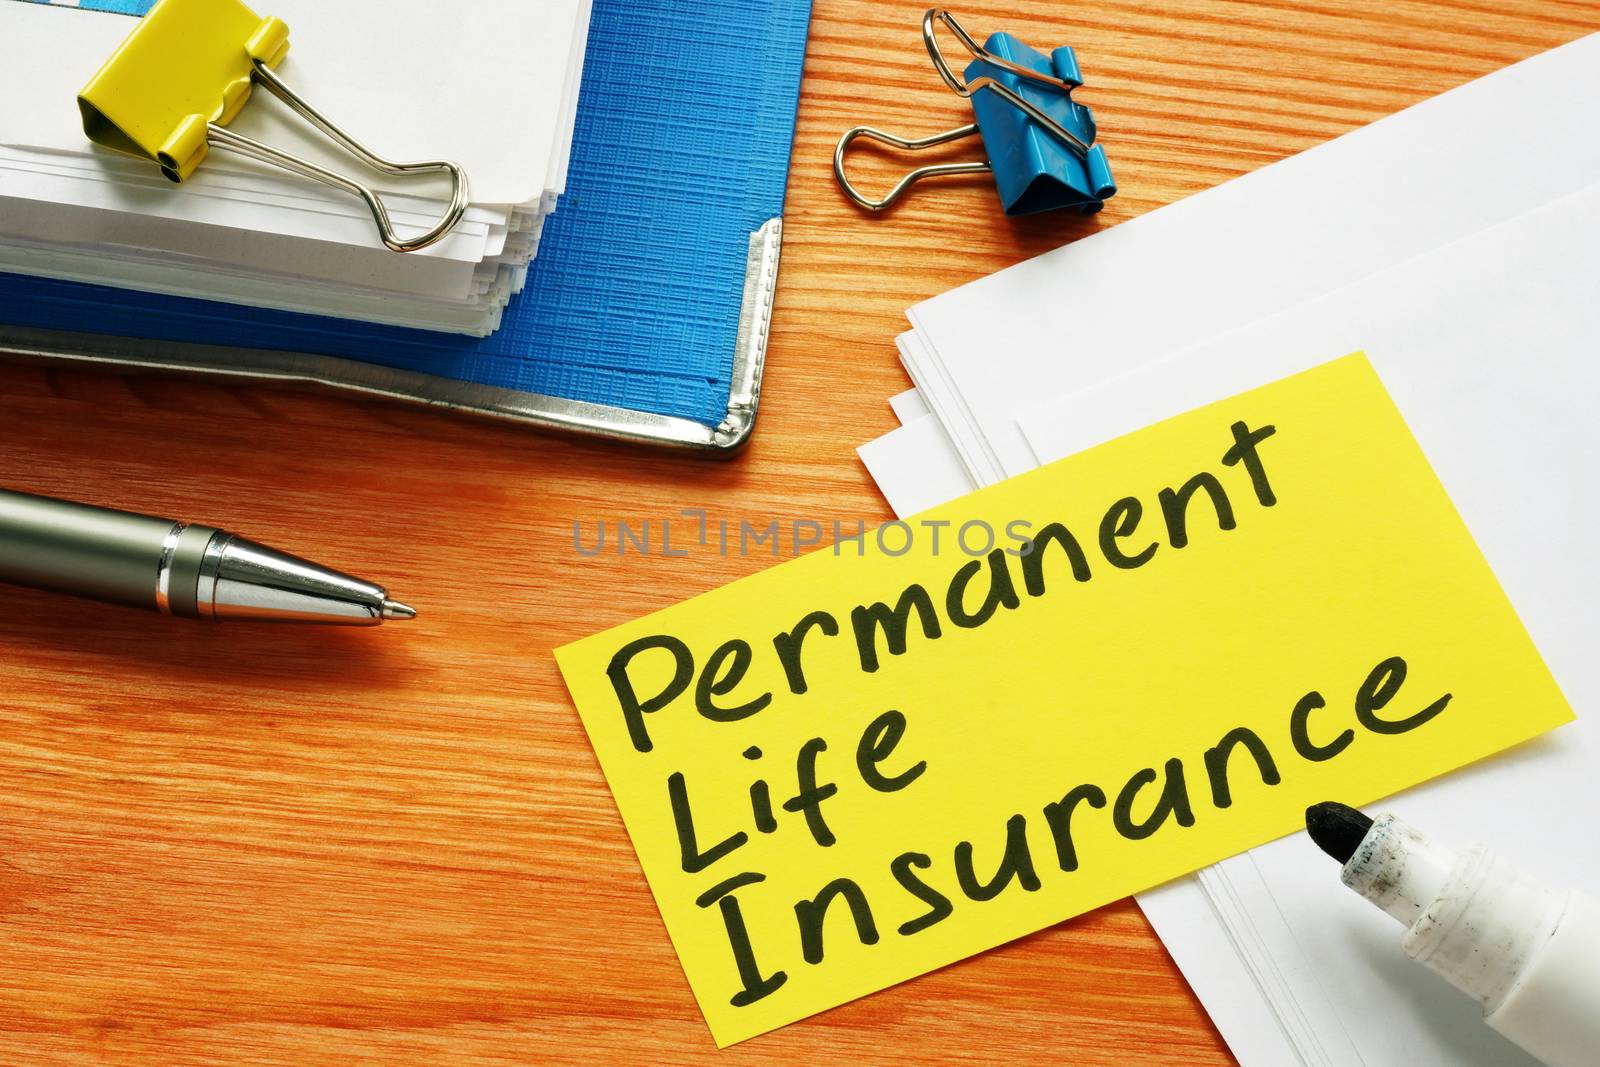 Permanent life insurance form and pen for signing.